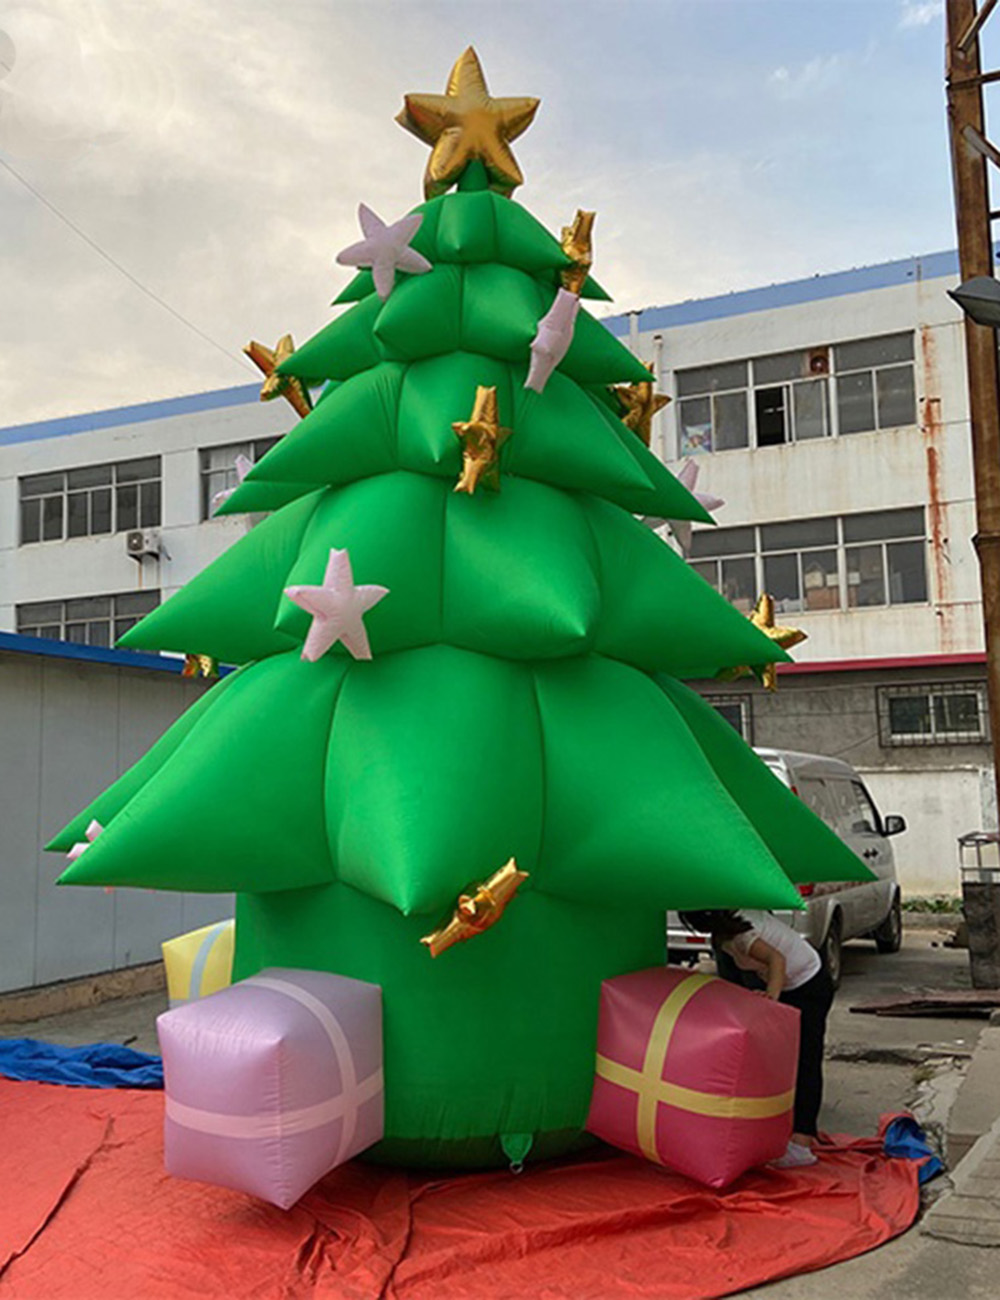 wholesale Customized outdoor Giant 3/4/6/8m high green inflatable Christmas tree decorations gift boxes embellished